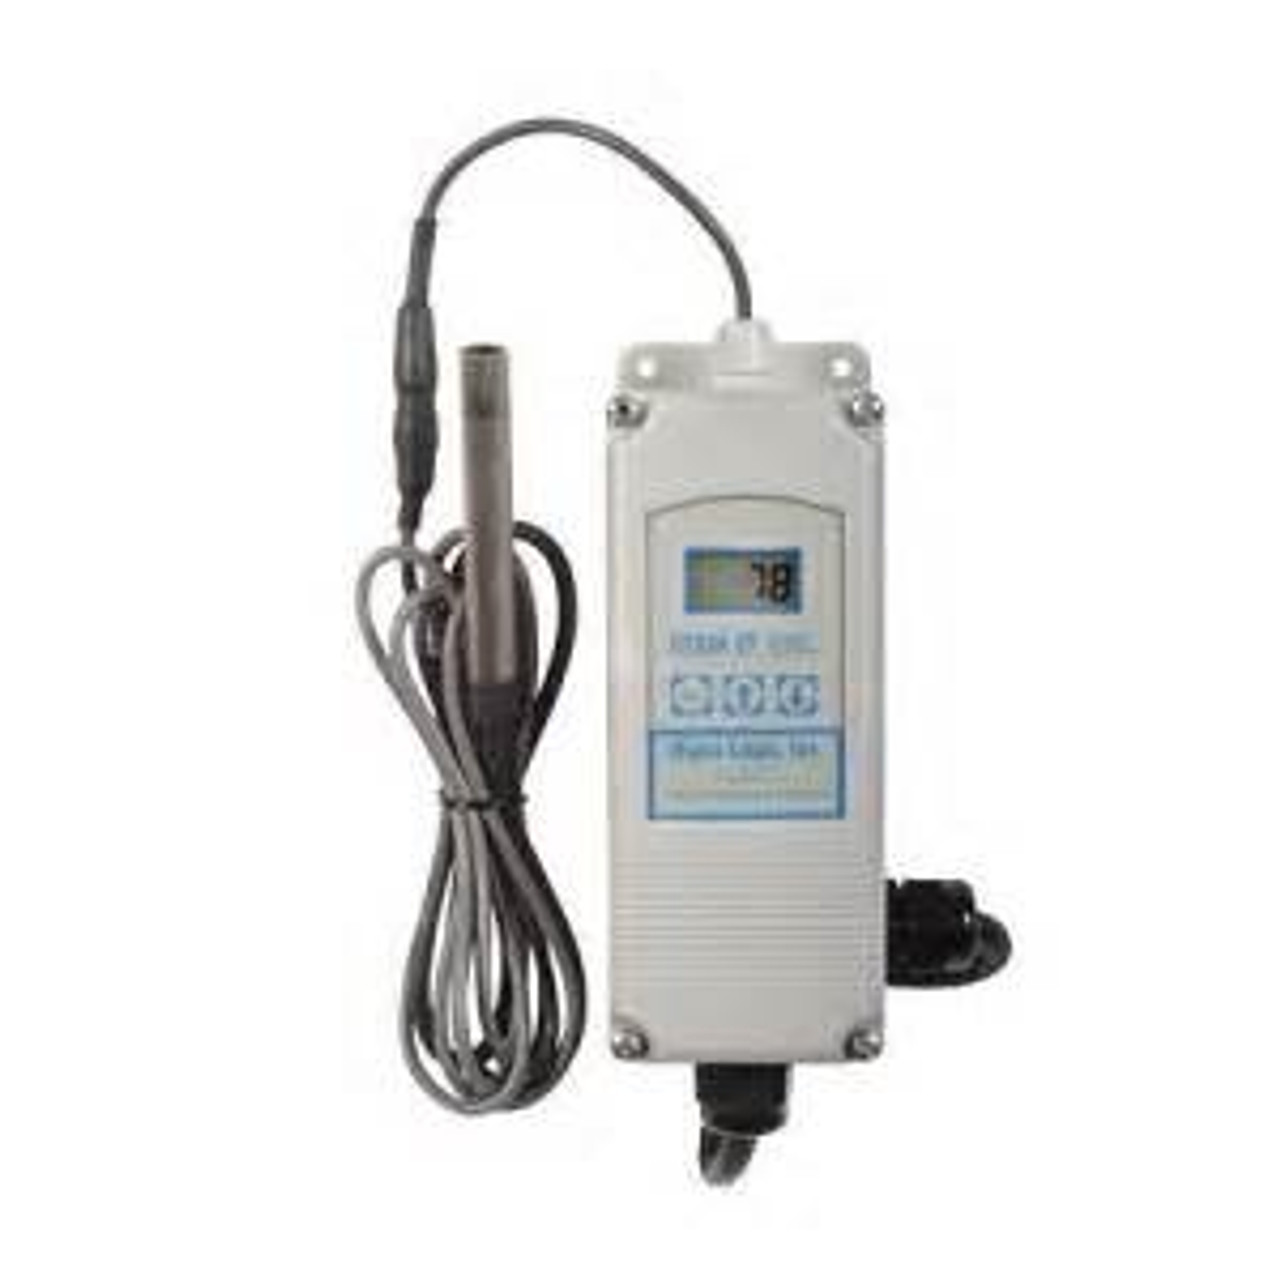 Aqua Logic Digital Controller (single stage) for 1/4 - 1/2 hp 115v with 10 ft Ti submersible sensor